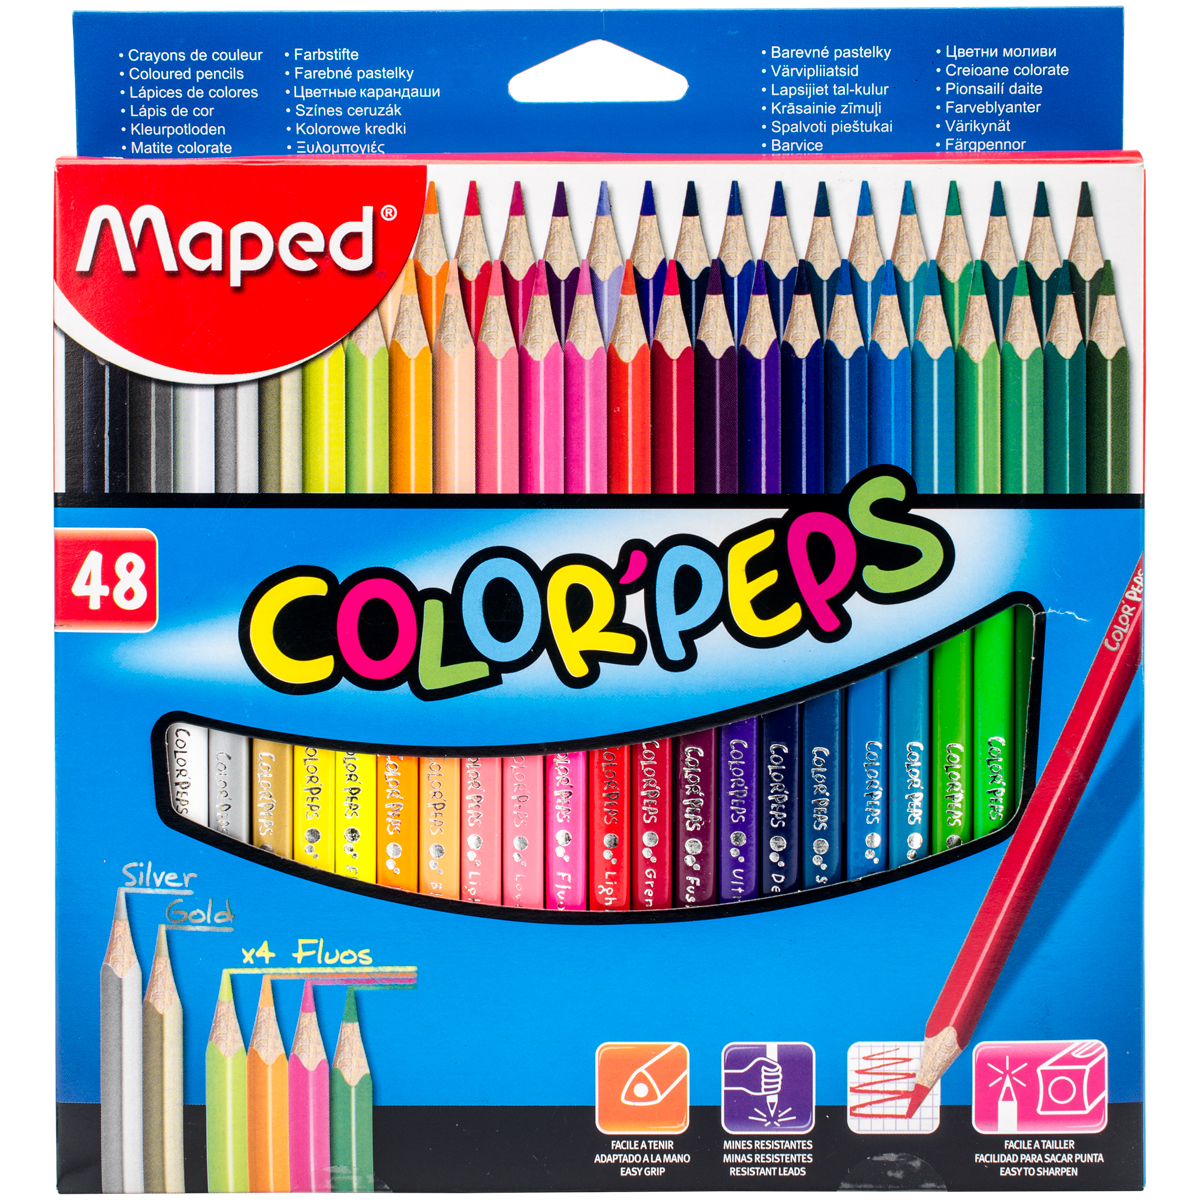 Maped Color'Peps Colored Pencil Set, 48-Pencils - image 1 of 3